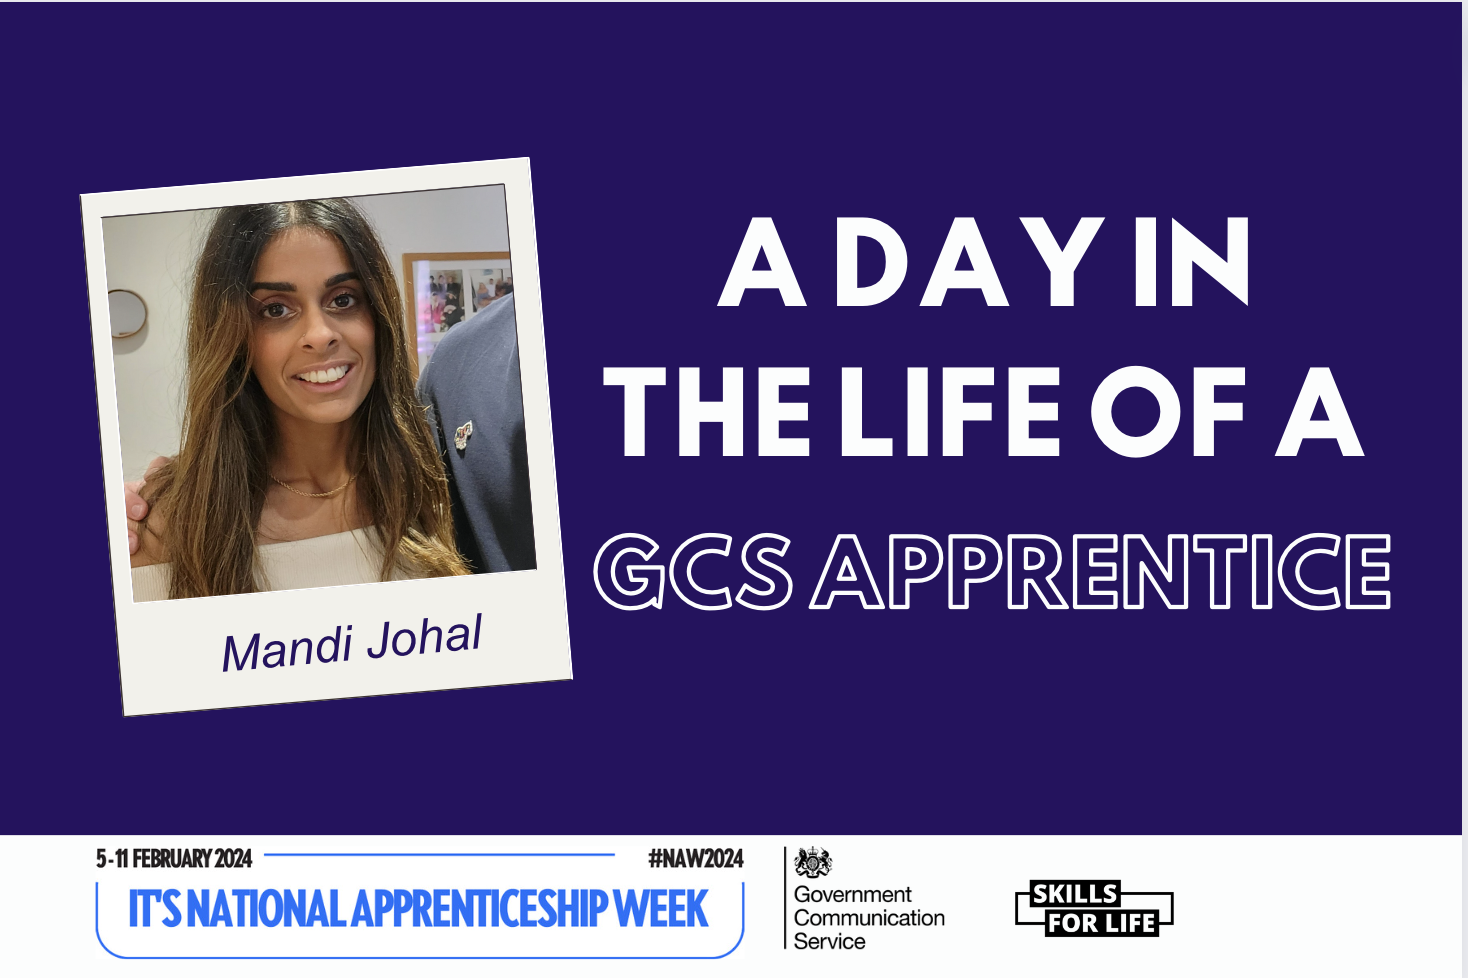 Bright blue text reads: It’s National Apprenticeship Week! 5 - 11 February 2024. The hashtag is: NAW2024. A white GCS logo is in the bottom left, along with the Skills for Life logo which is black. In the bottom right corner is a polaroid photo which has the caption: Mandi Johal, current GCS Apprentice.